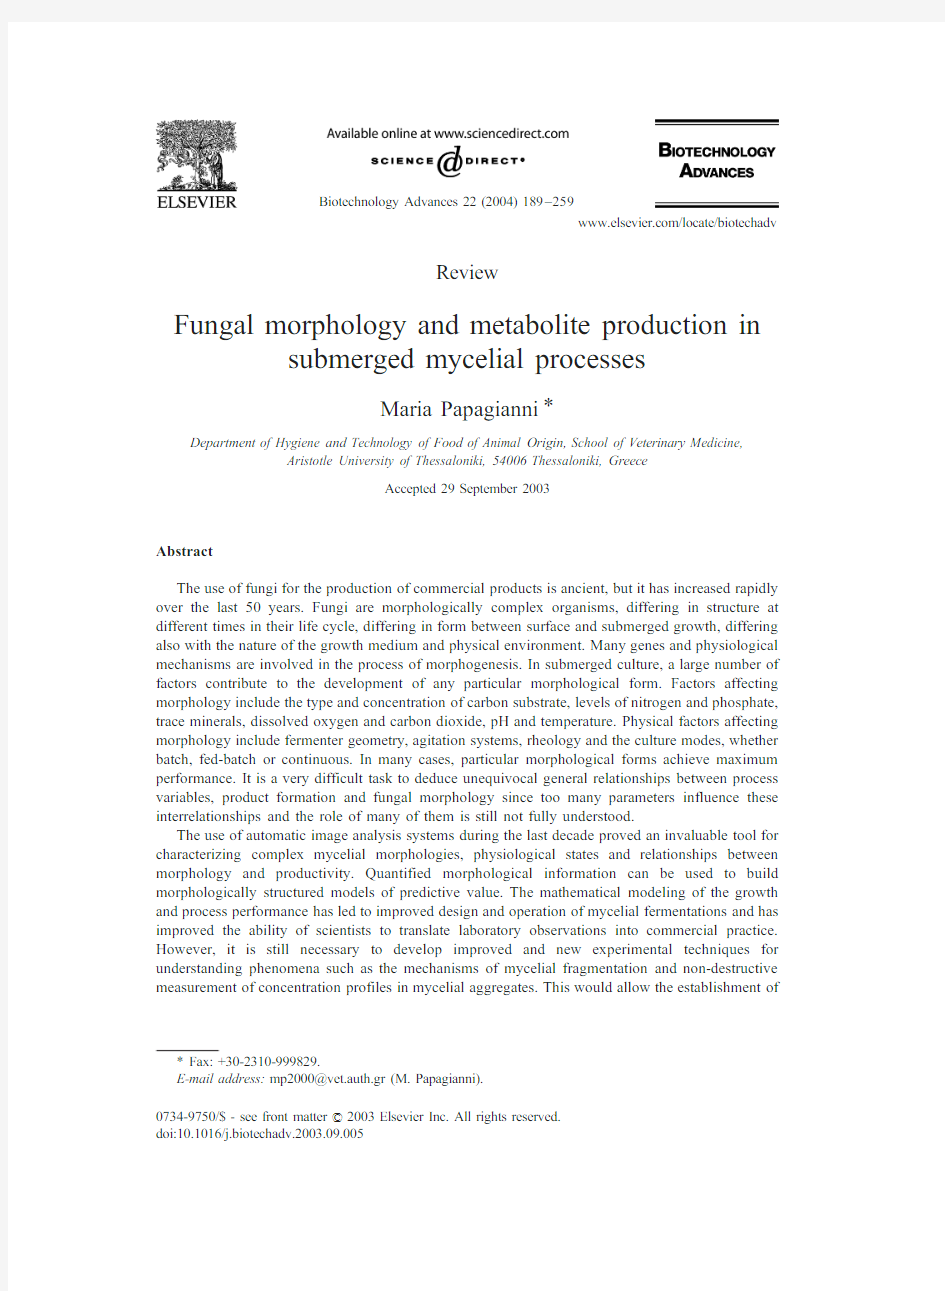 Fungal morphology and metabolite production in submerged mycelial processes